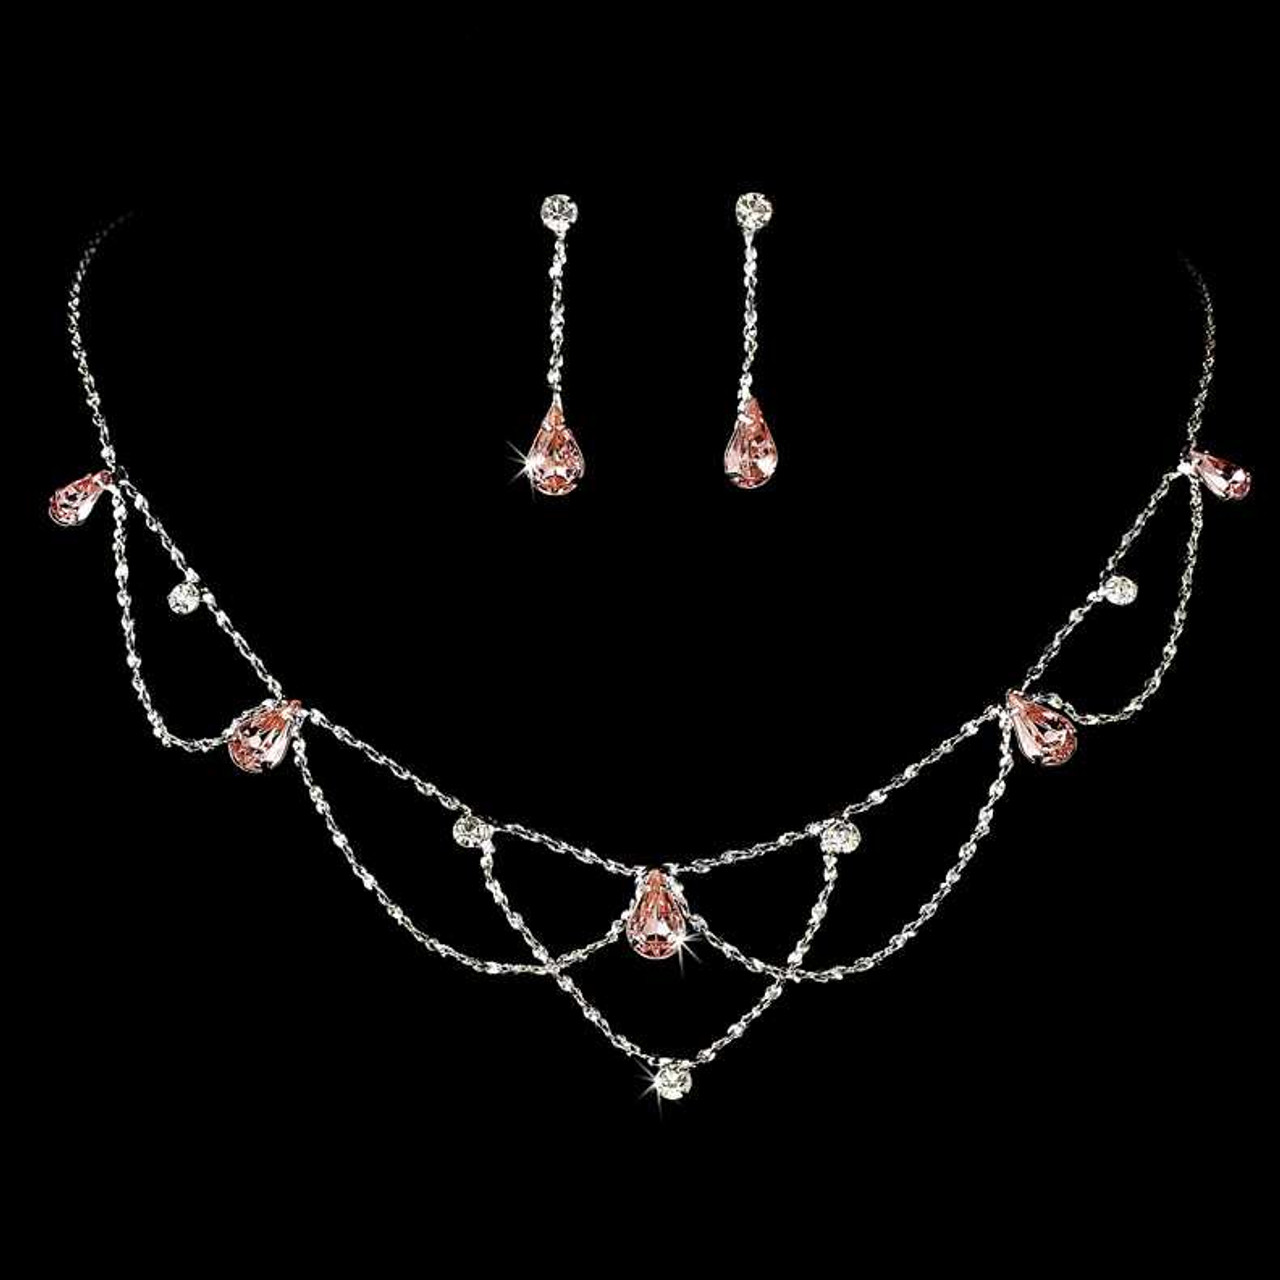 Multi Strand Pink Necklace and Earrings Set - Two Oaks Farmstead